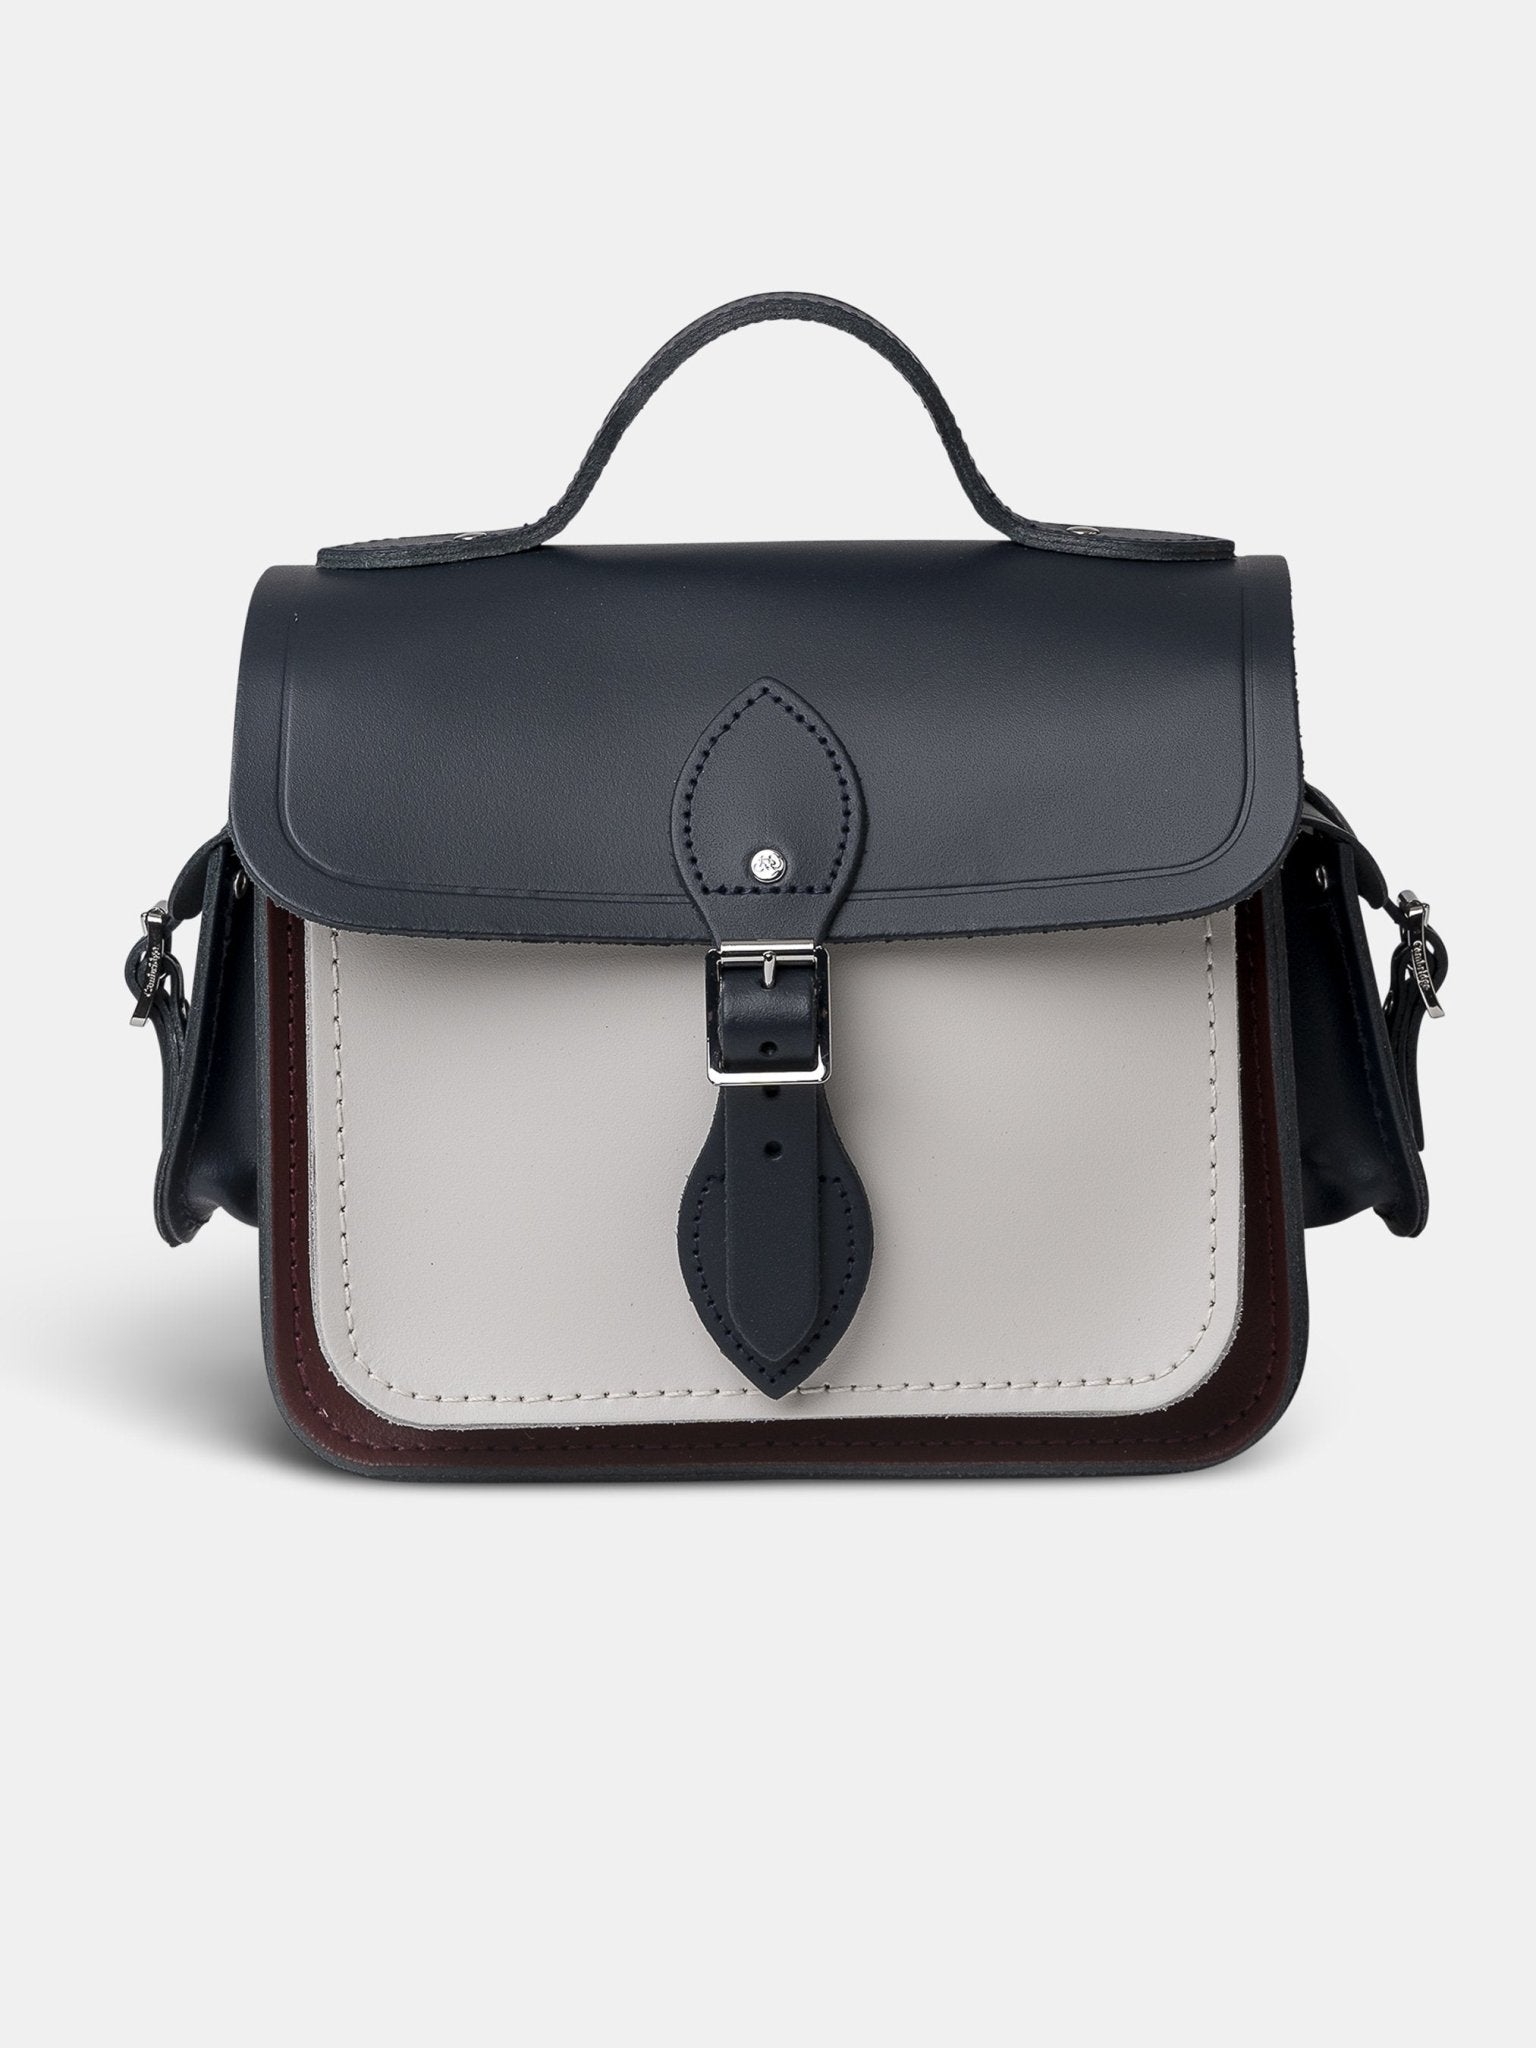 The Traveller - Clay, Oxblood & Navy - The Cambridge Satchel Company US Store